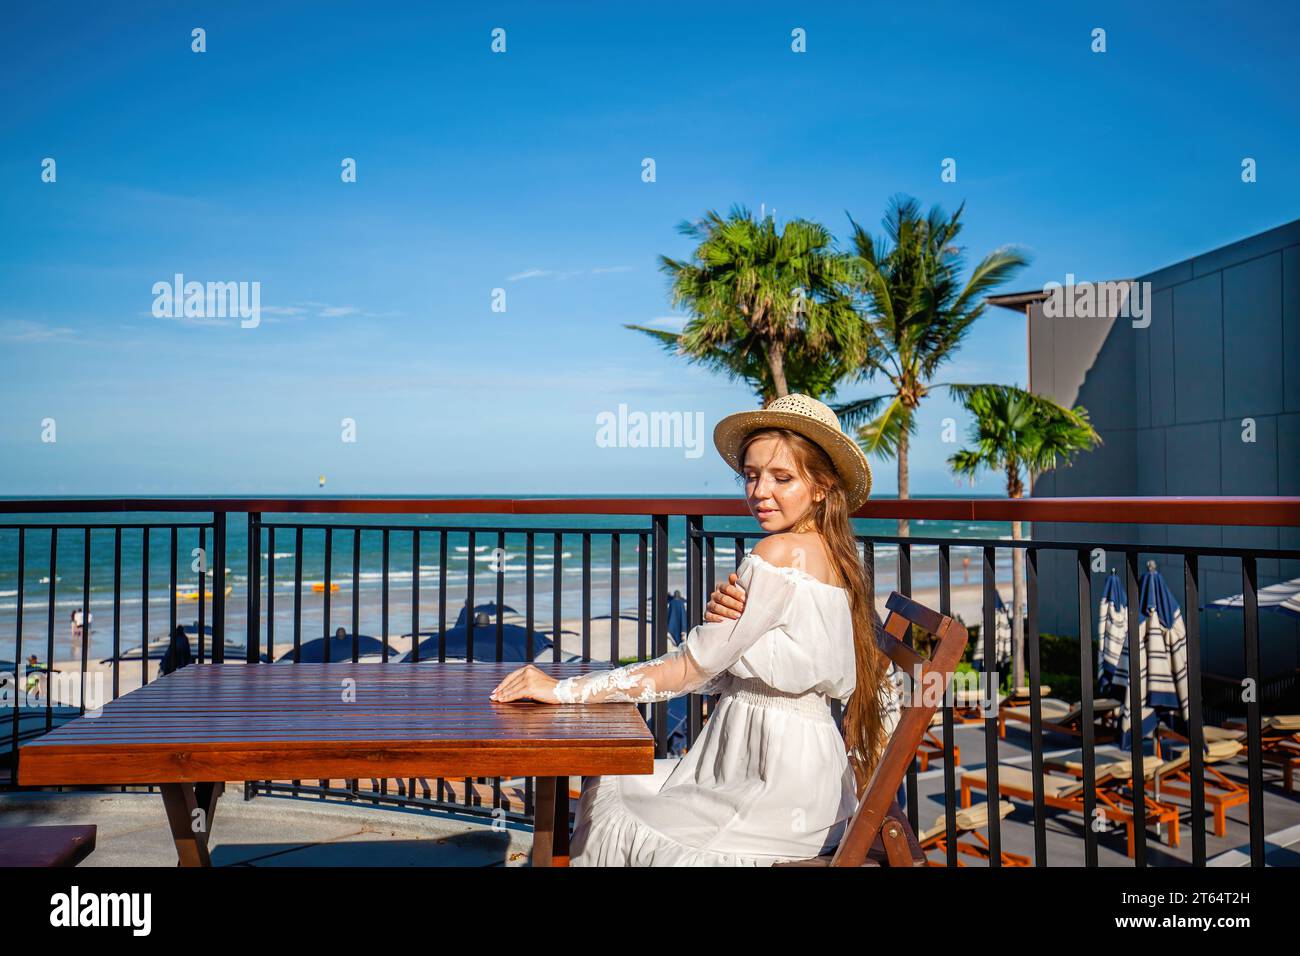 Captured moment of woman observing seascape from terrace Stock Photo